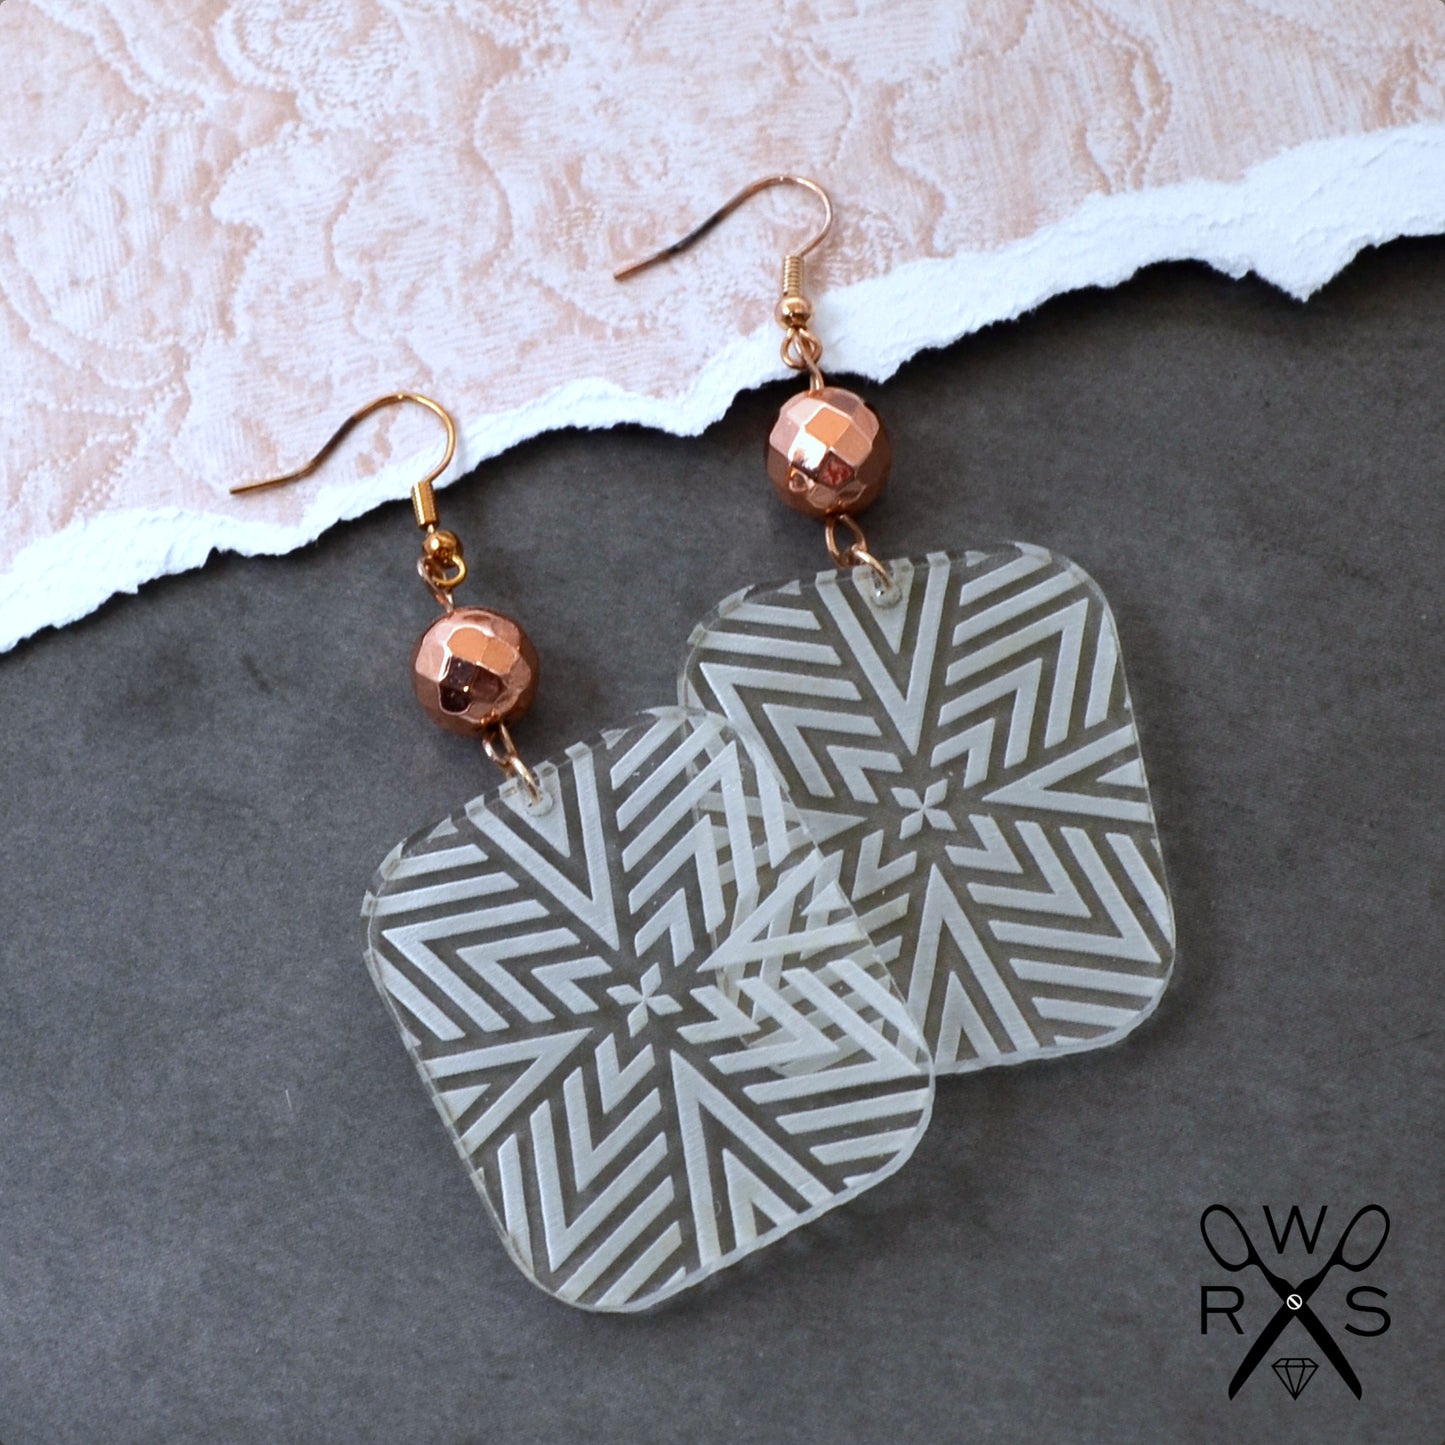 SALE Geometric Starburst Dangles in Clear and Rose Gold - Laser Cut Acrylic Dangle Earrings